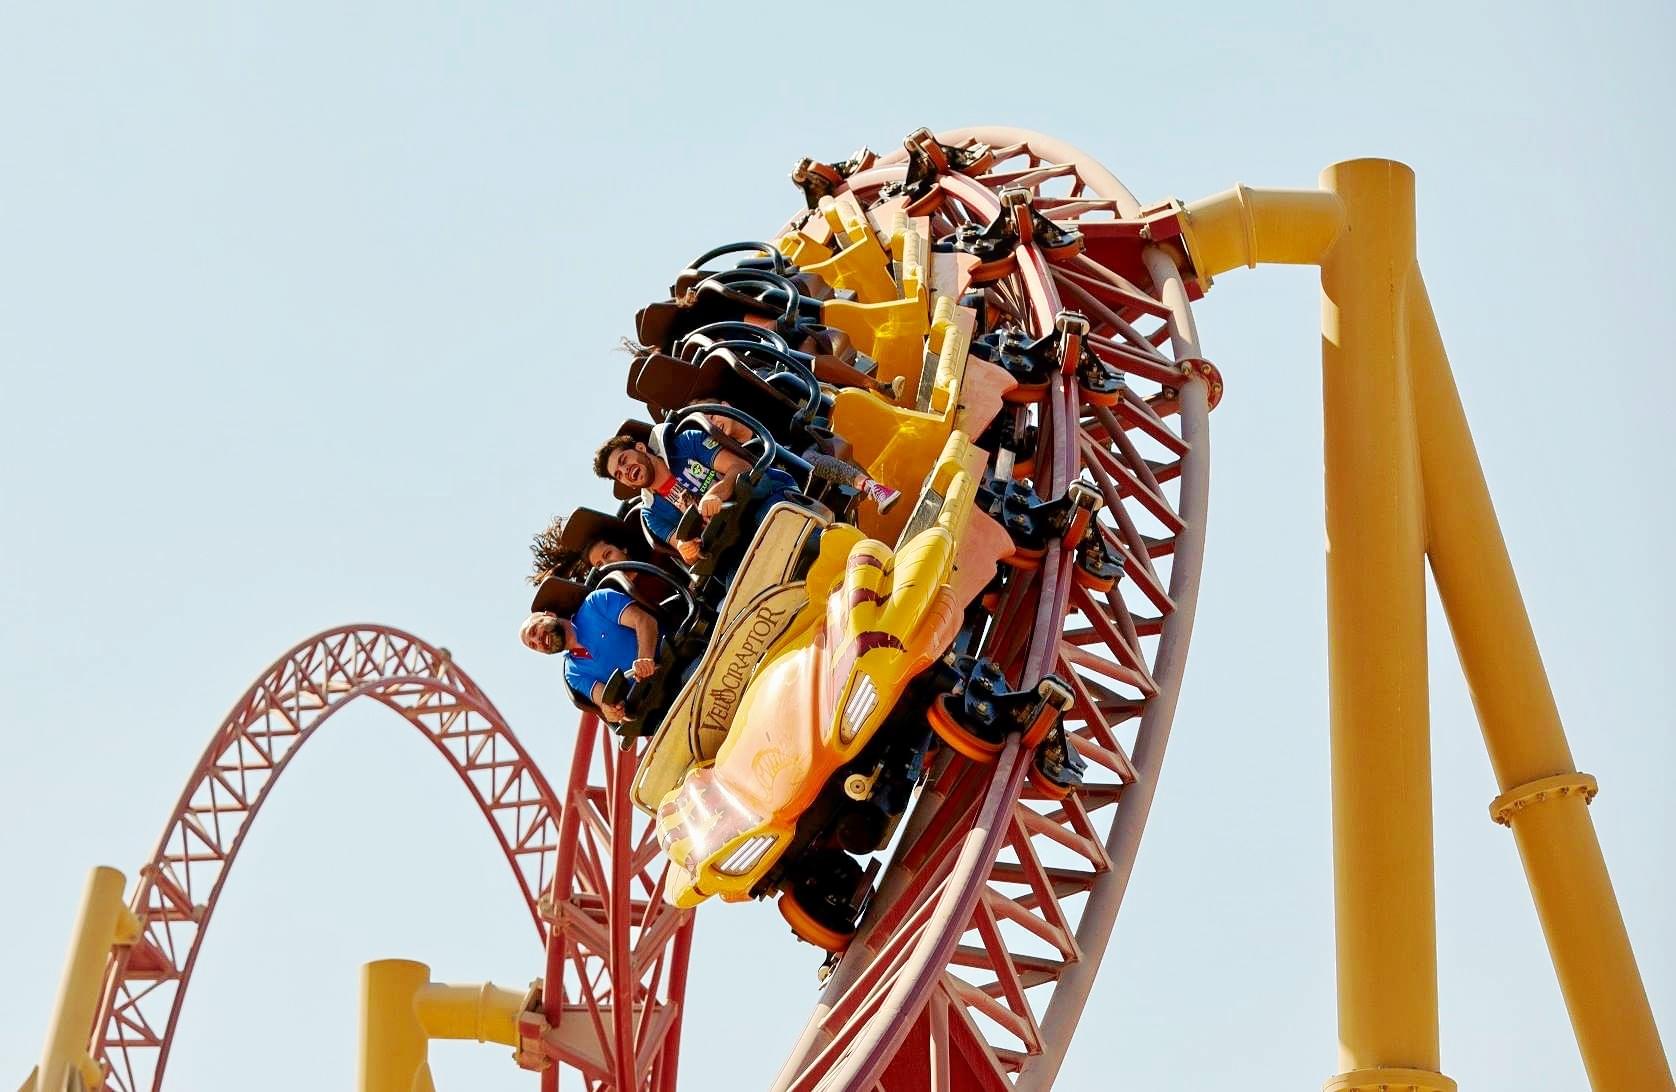 Experience the thrill of a lifetime on a roller coaster at the theme park